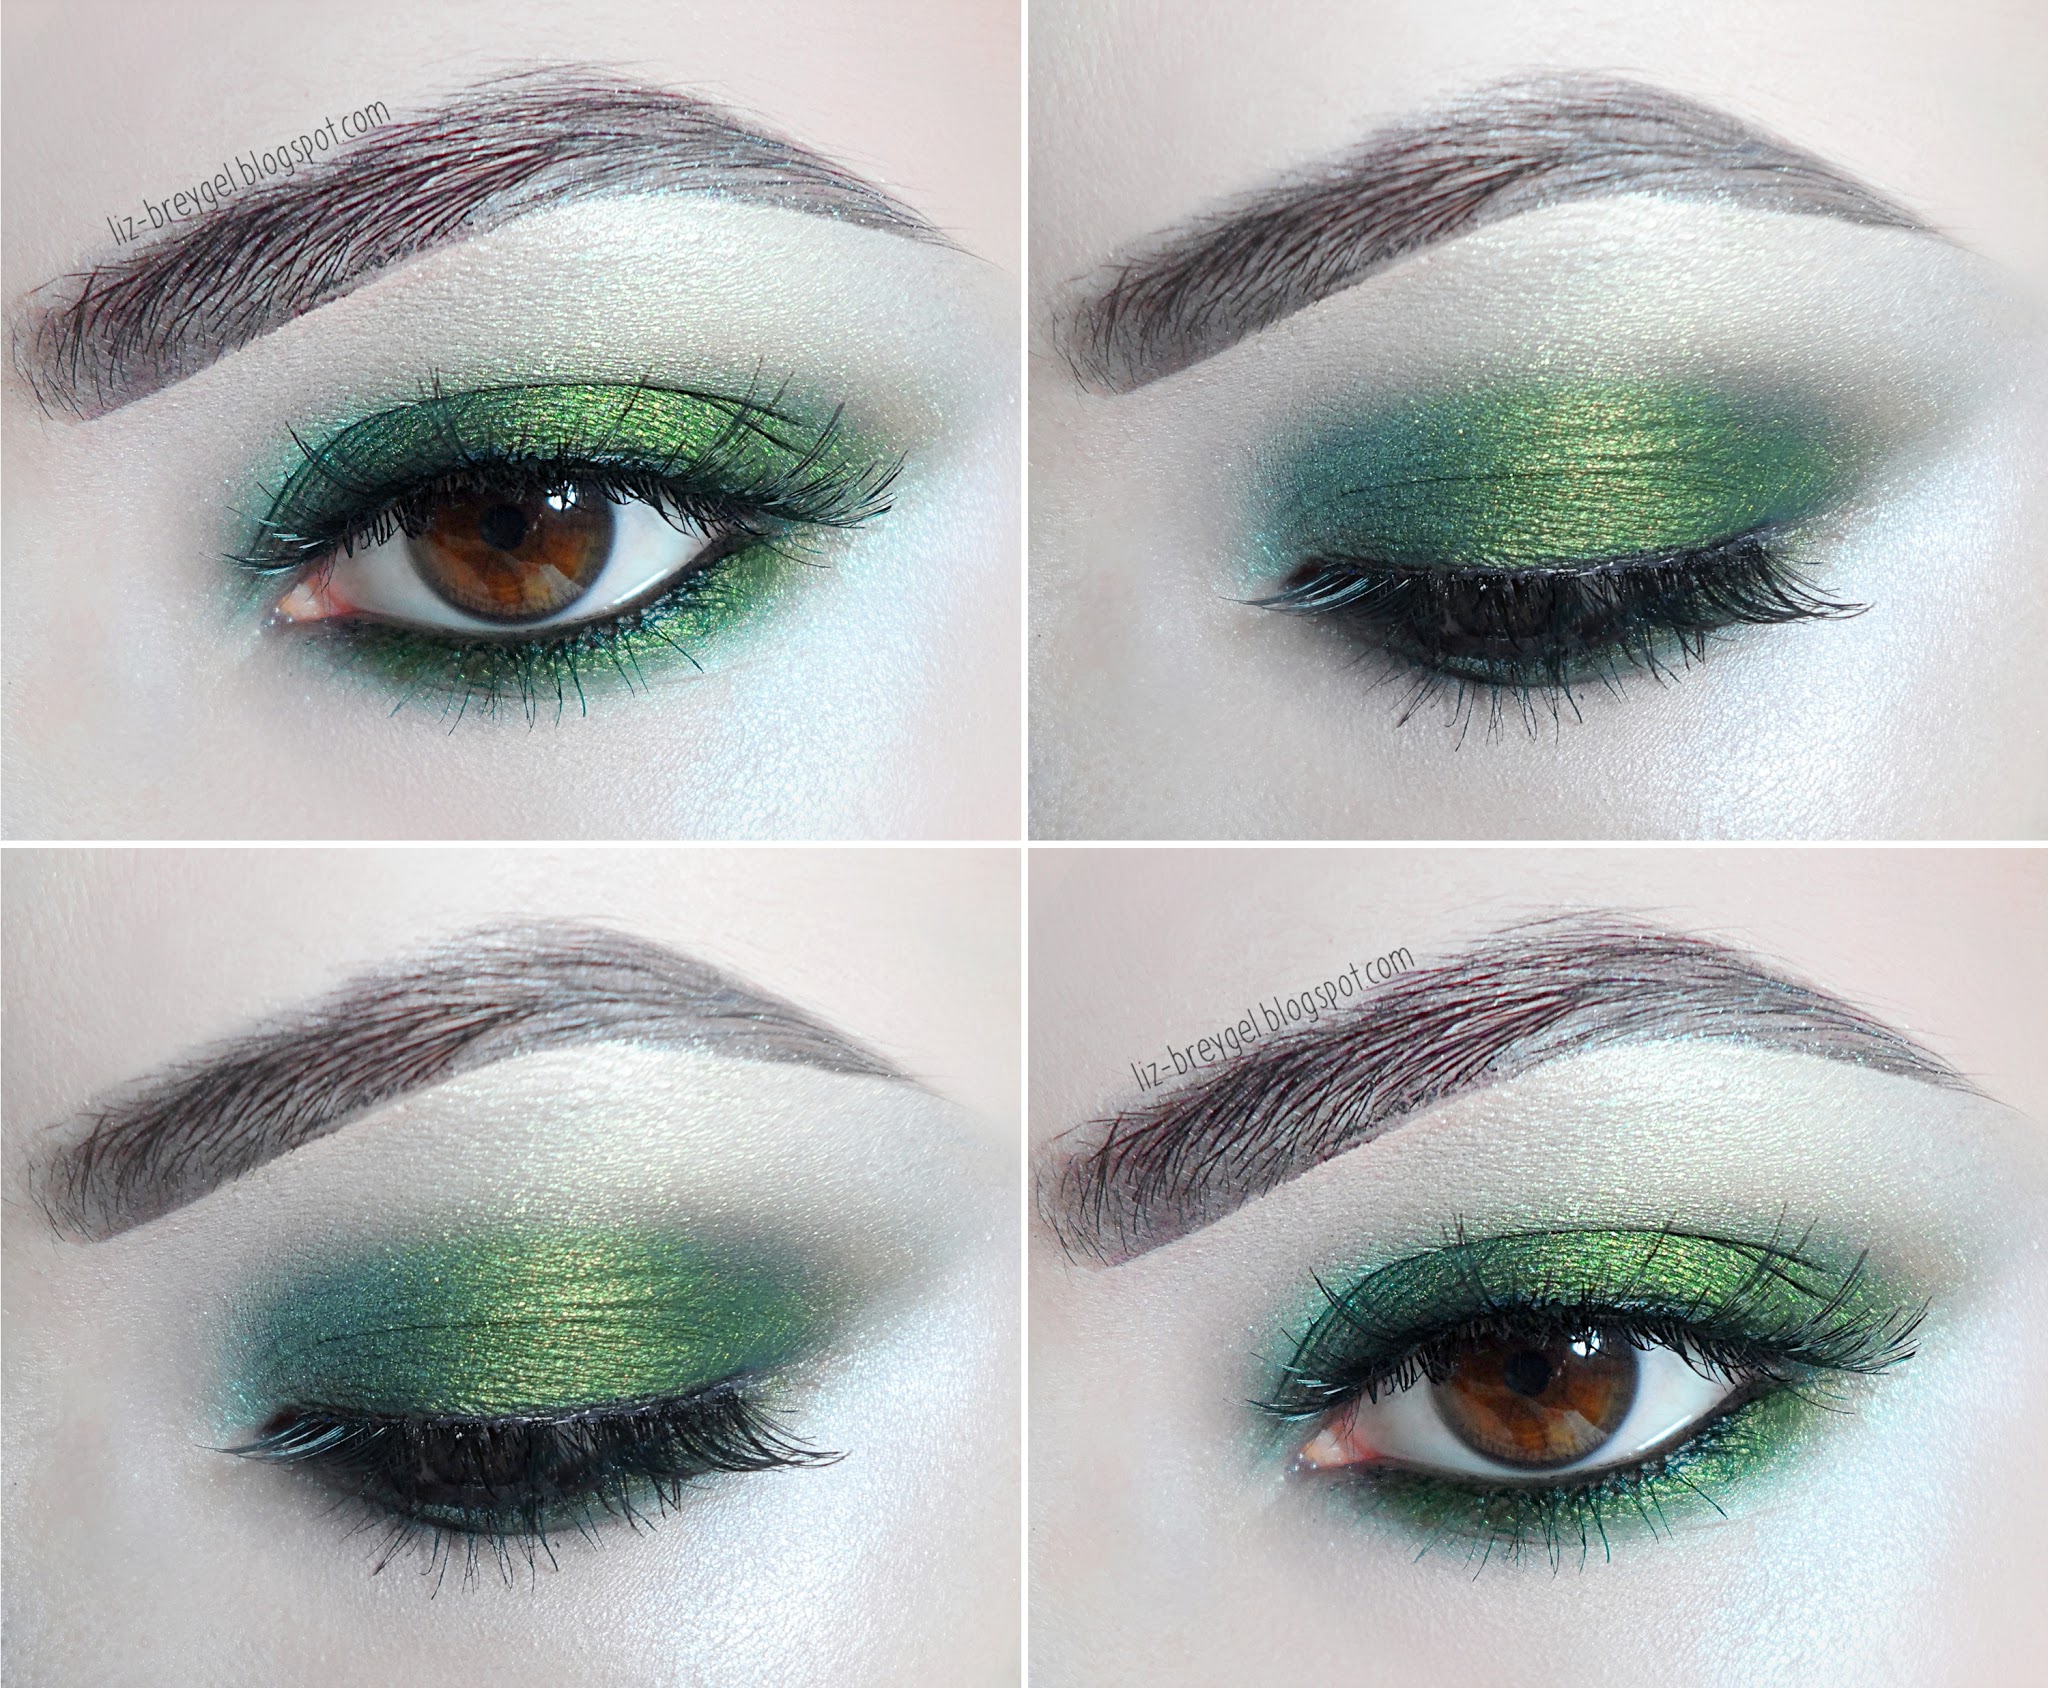 makeup pictorial on how to do green smokey eye look inspired by peridot